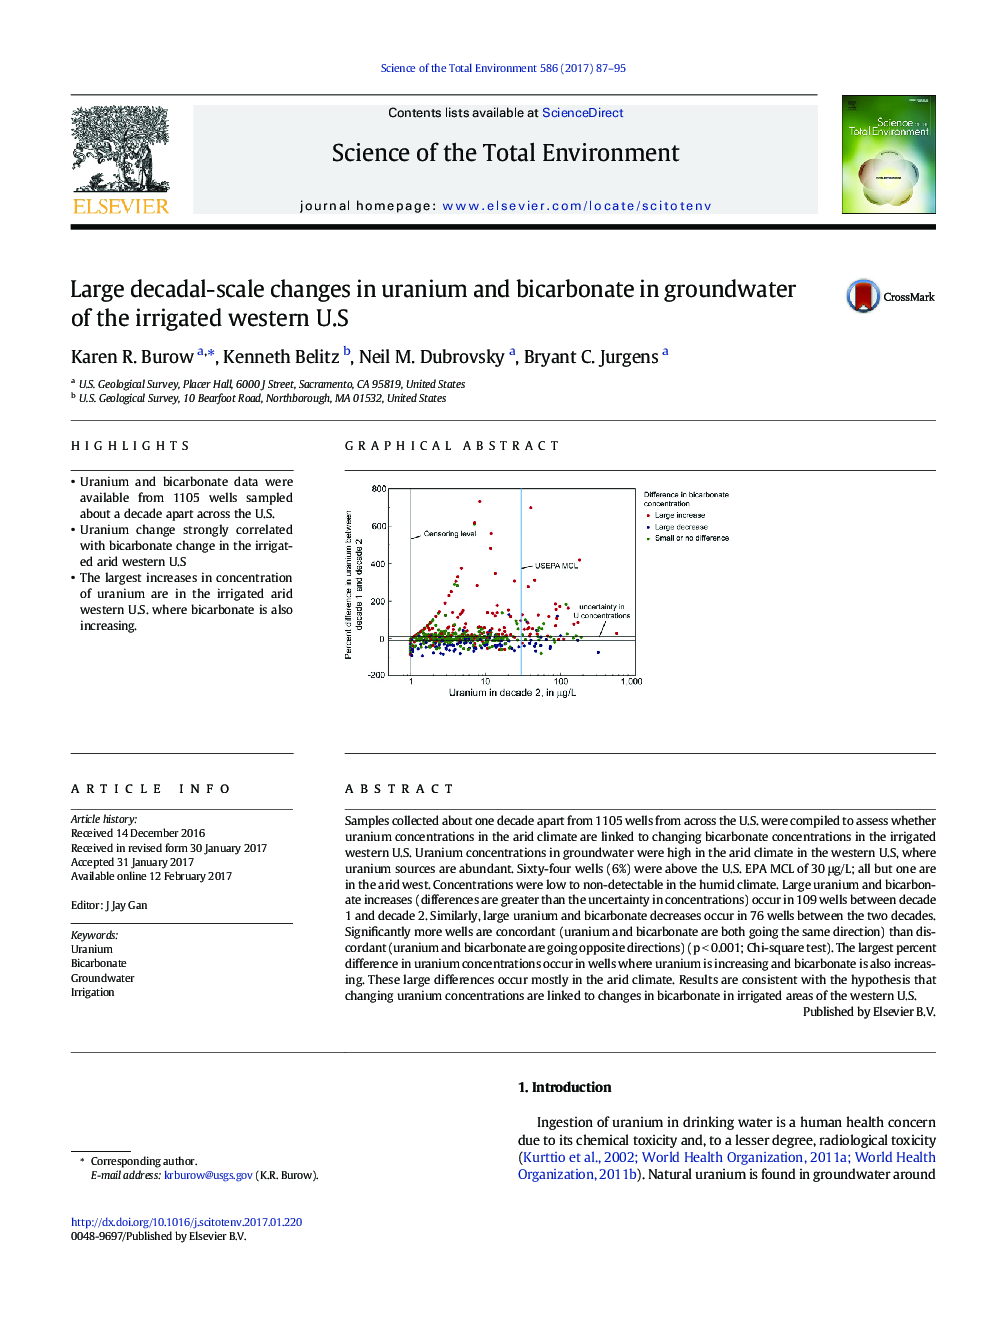 Large decadal-scale changes in uranium and bicarbonate in groundwater of the irrigated western U.S